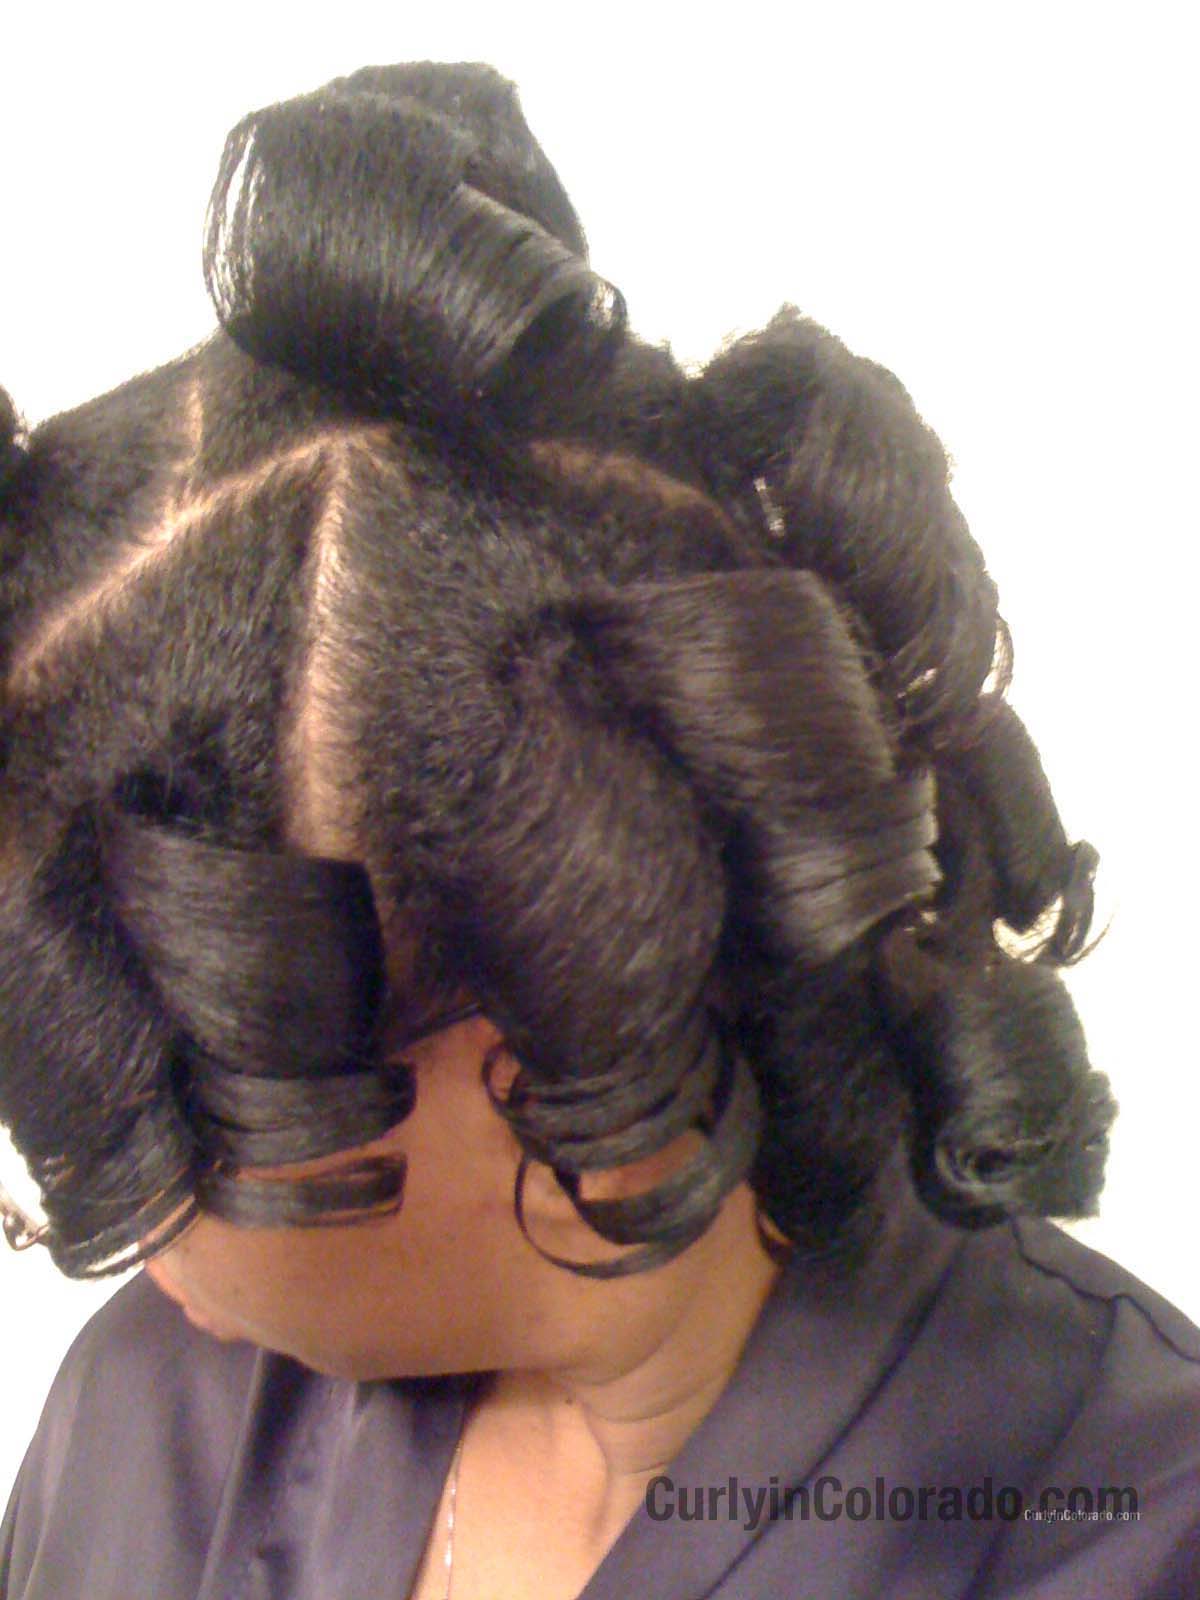 Ponytail Roller Set on Natural Hair - Curly in Colorado